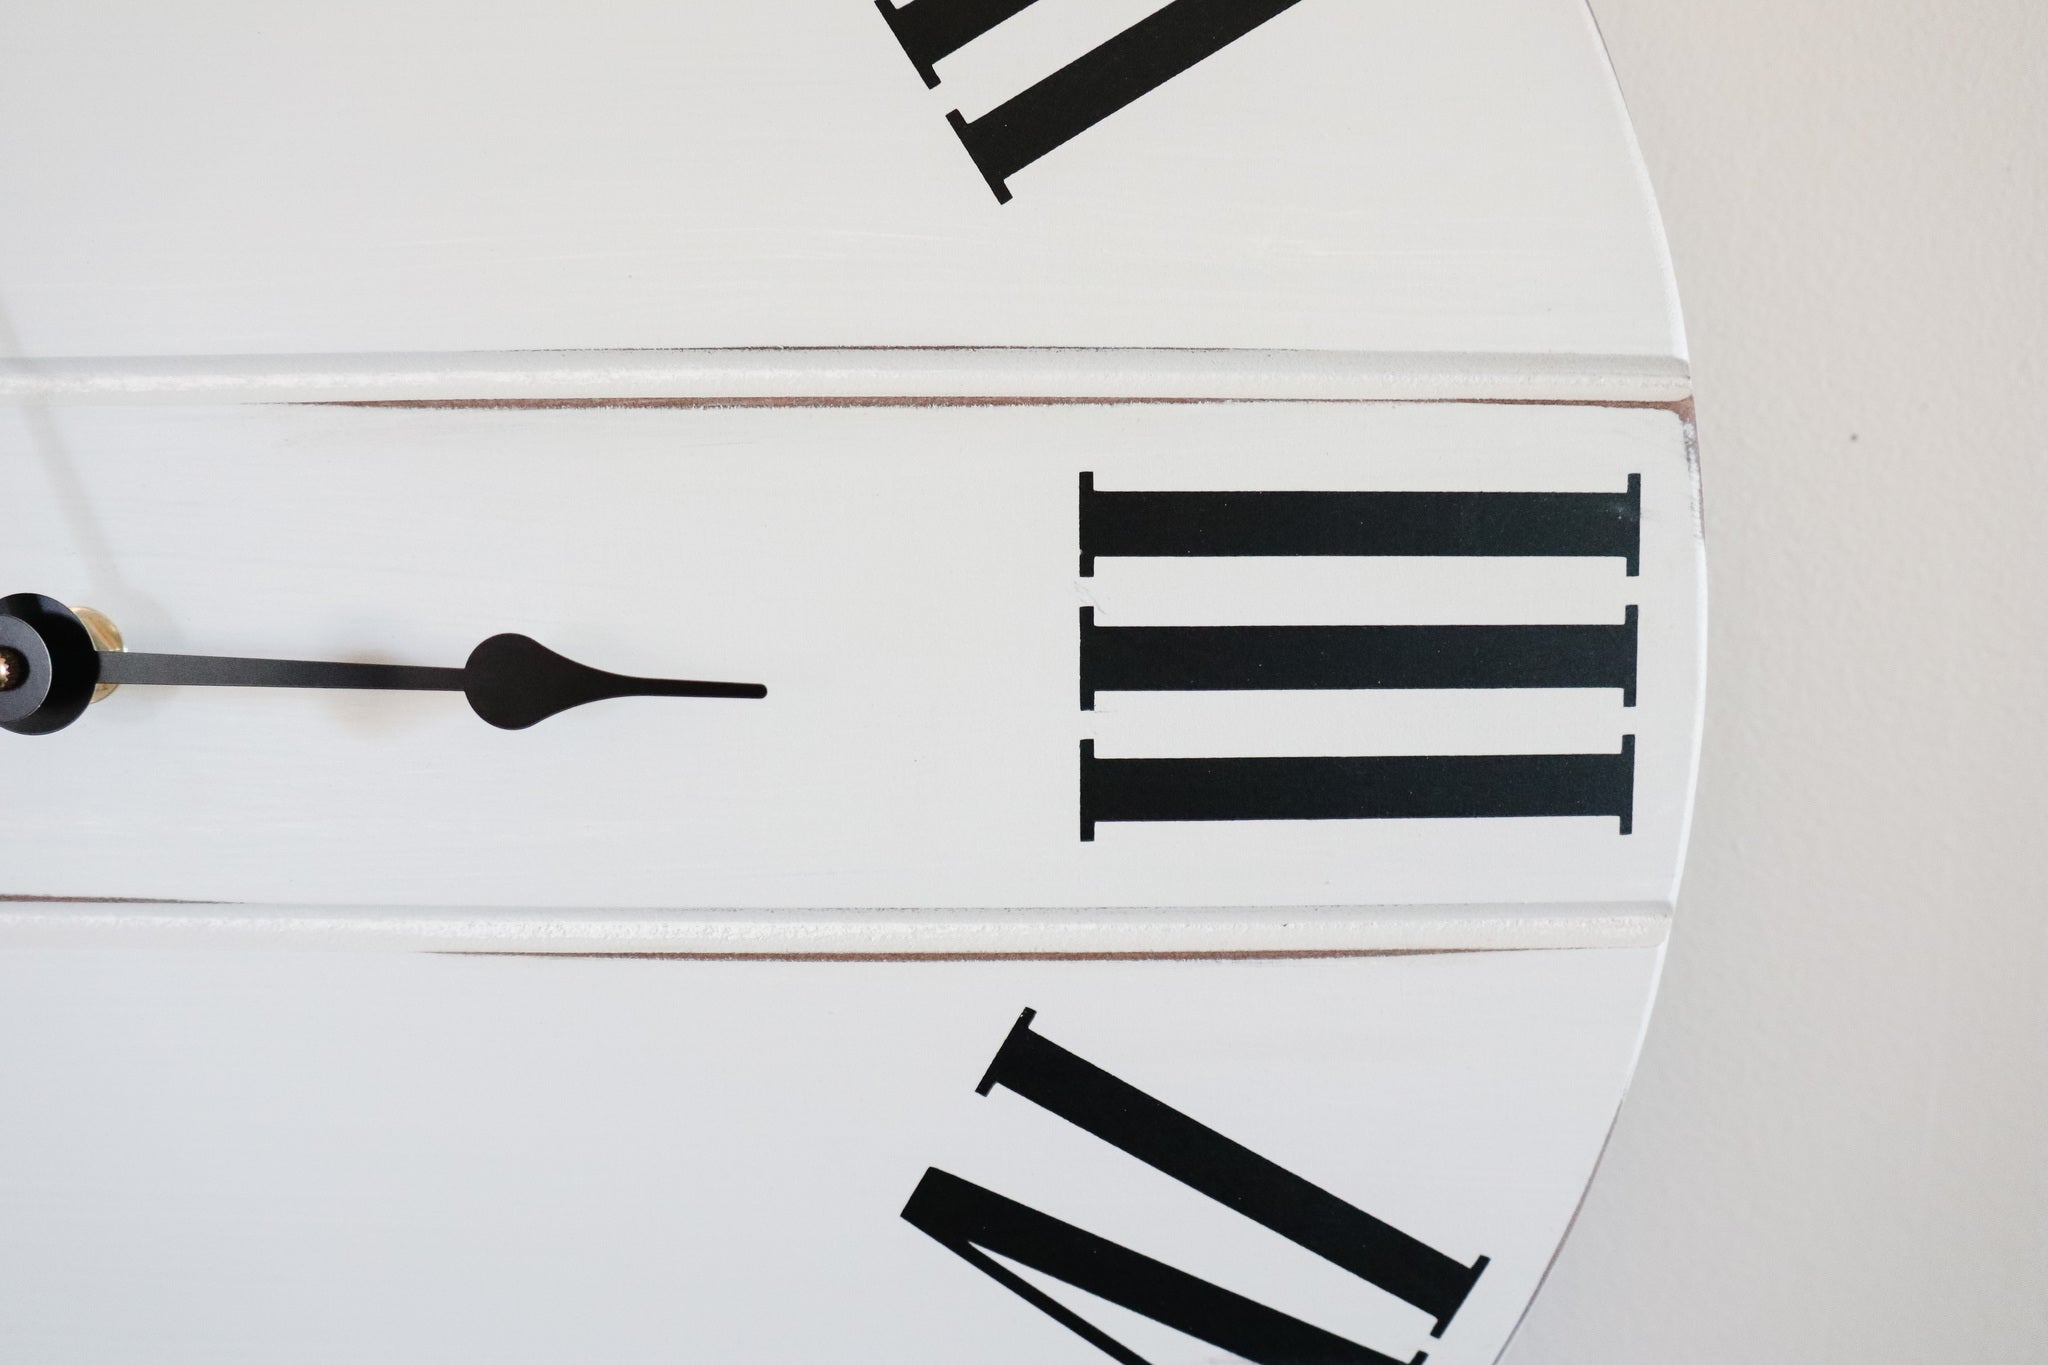 Simple White Lightly Distressed Large Wall Clock with Black Roman Numerals